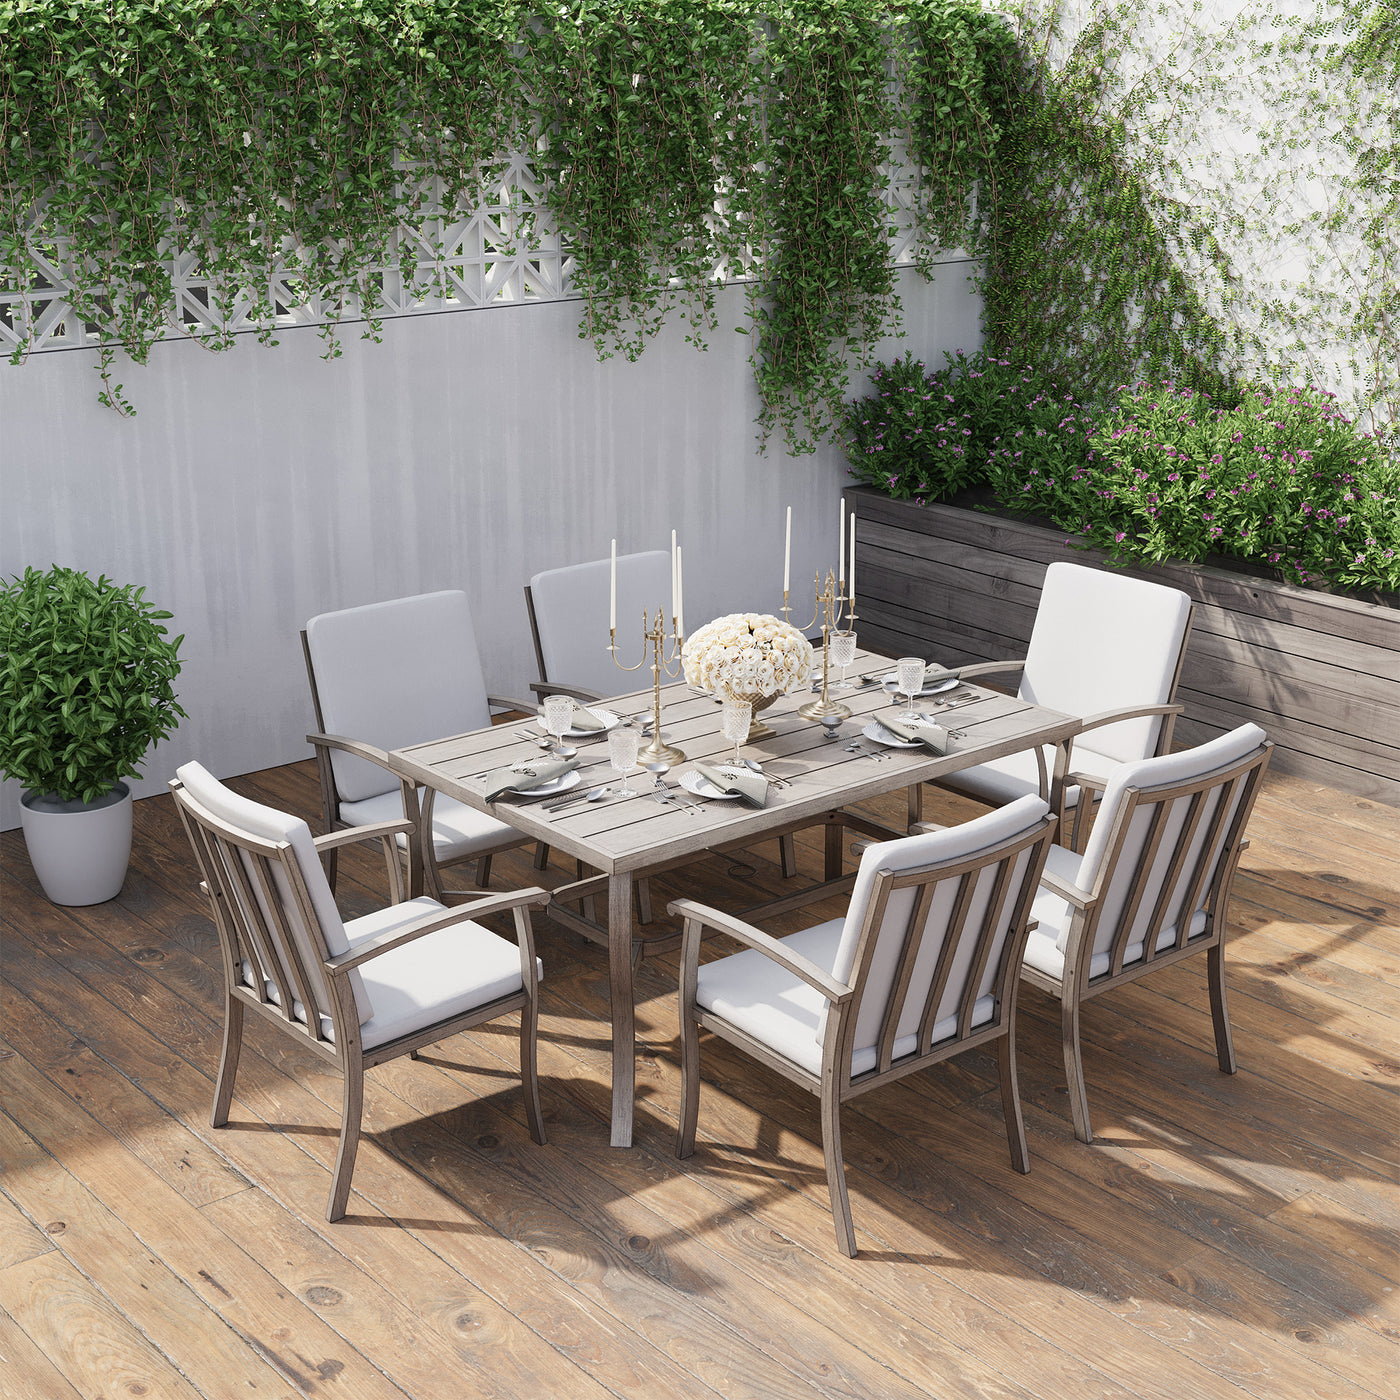 HAPPATIO 7 Piece Patio Dining Set, Aluminum Outdoor Dining Set, Aluminum Dining Table and Chairs Set, Patio Dining Furniture with Aluminum Table, Chairs and Washable Cushions